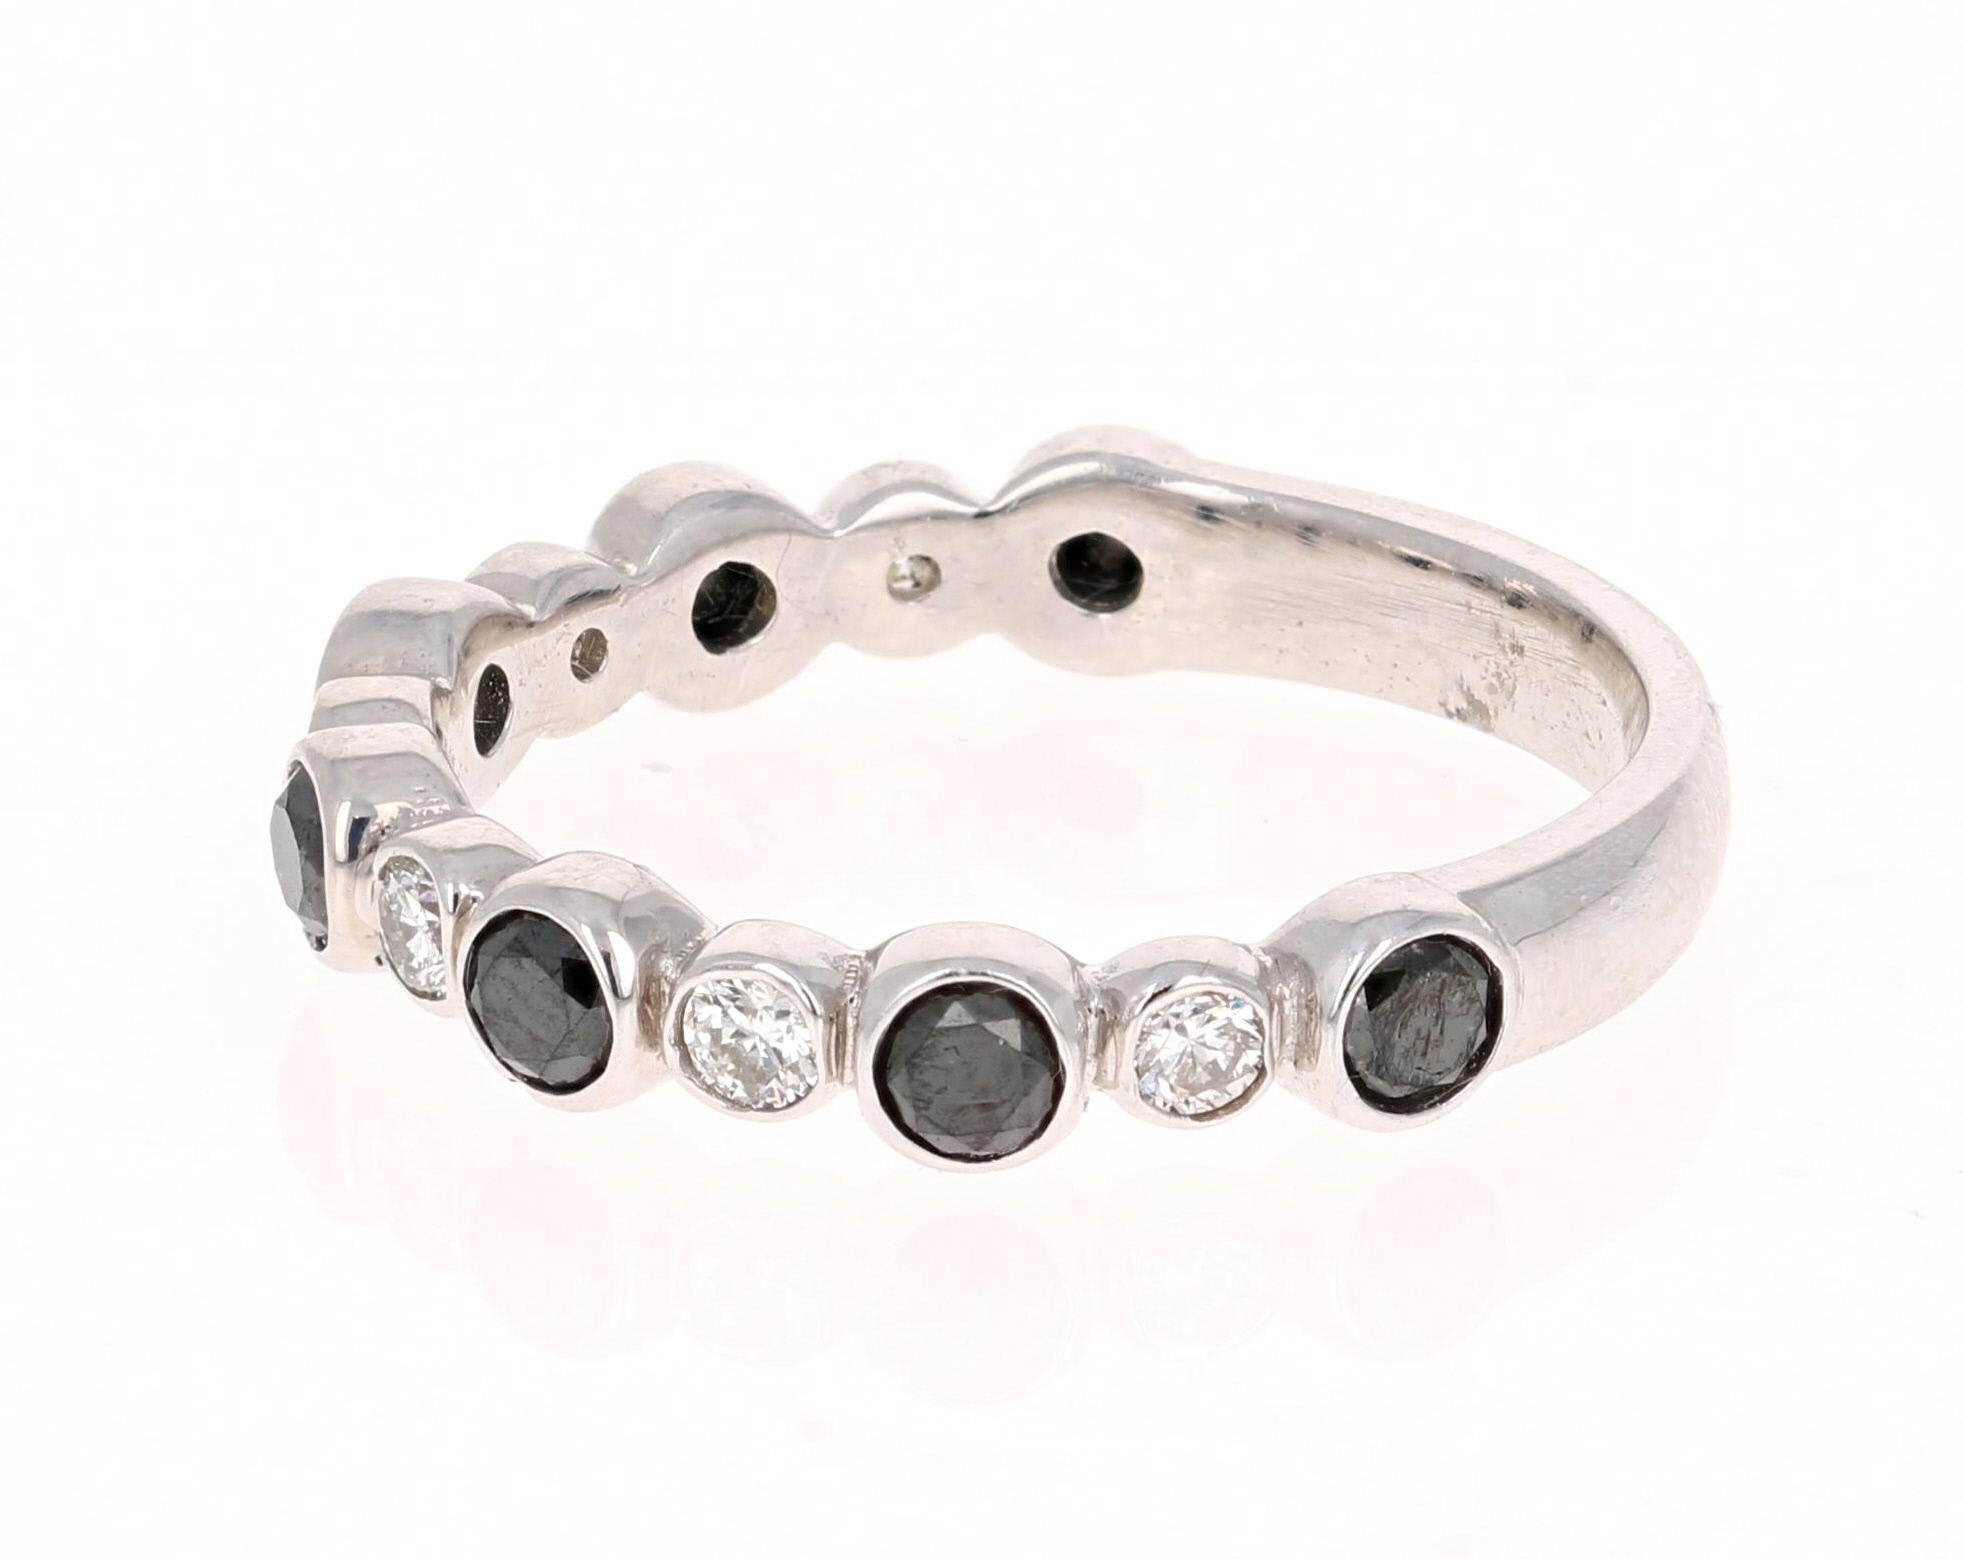 Cute and Dainty 0.75 Carat Black Diamond and White Diamond Band that is sure to be a great addition to anyone's accessory collection.   There are 7 Round Cut Black Diamonds that weigh 0.54 carats and 6 Round Cut Diamonds that weigh 0.21 carats.  The